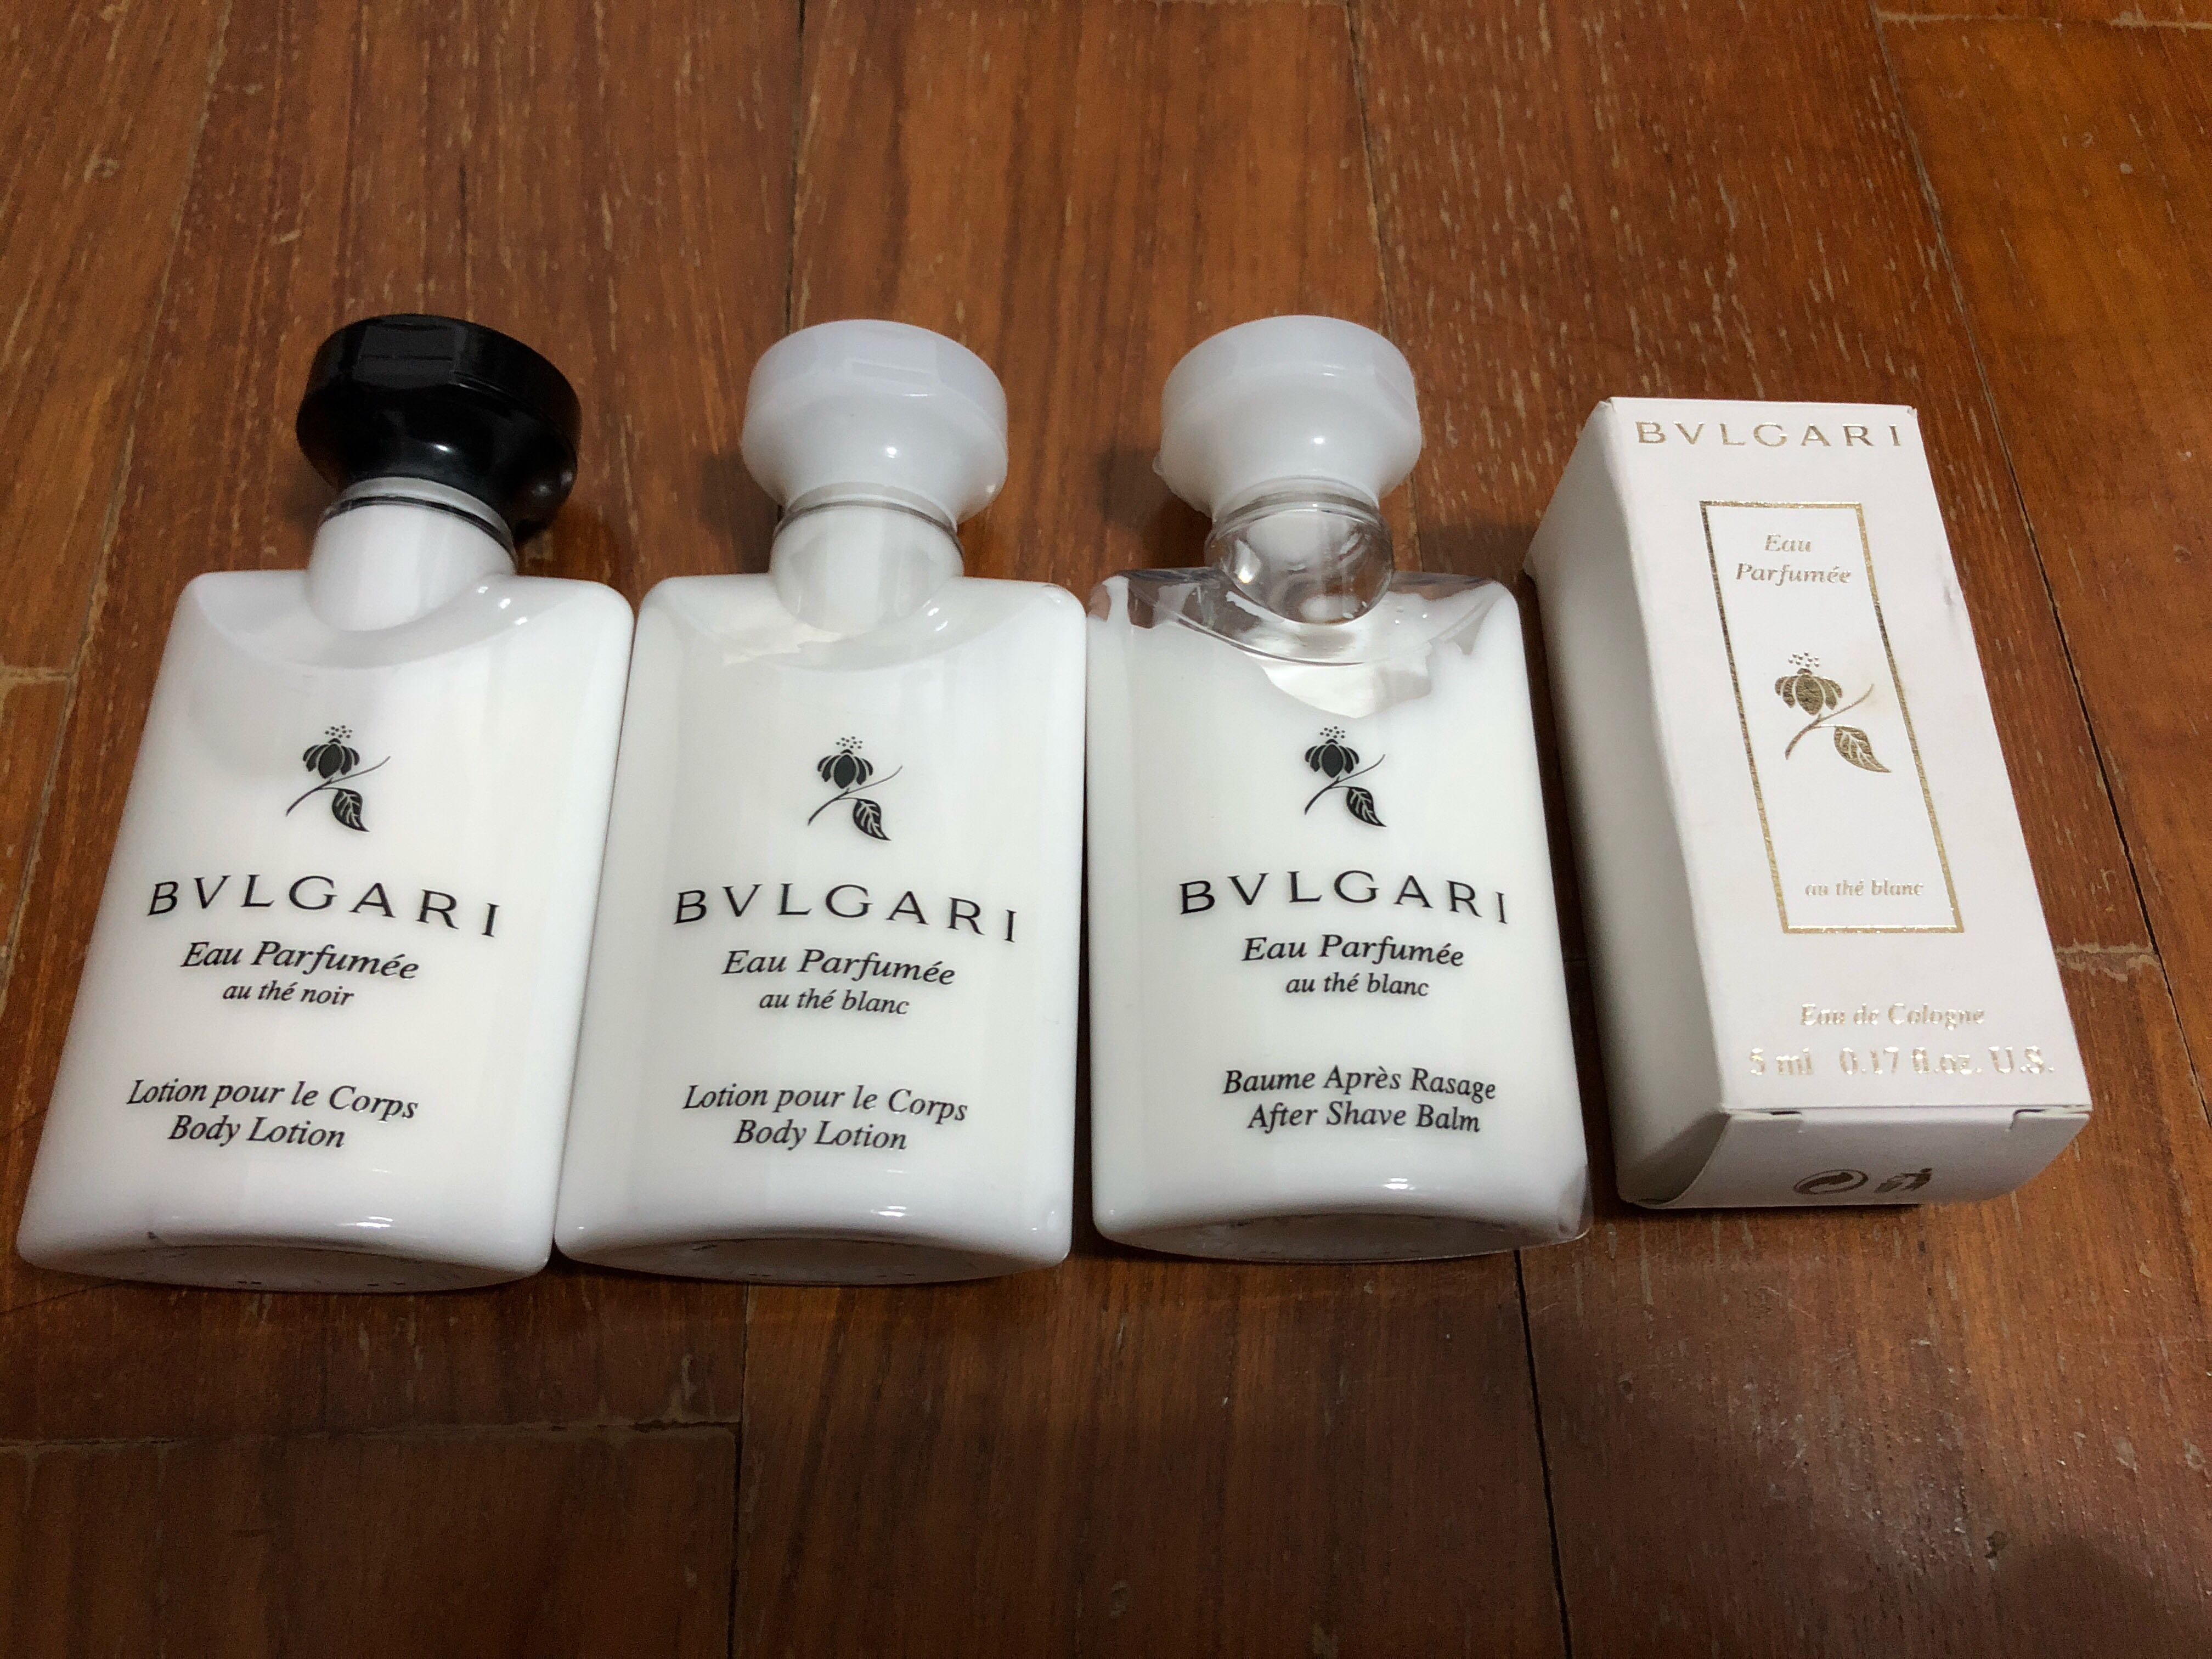 Bvlgari body lotion / after shave balm 